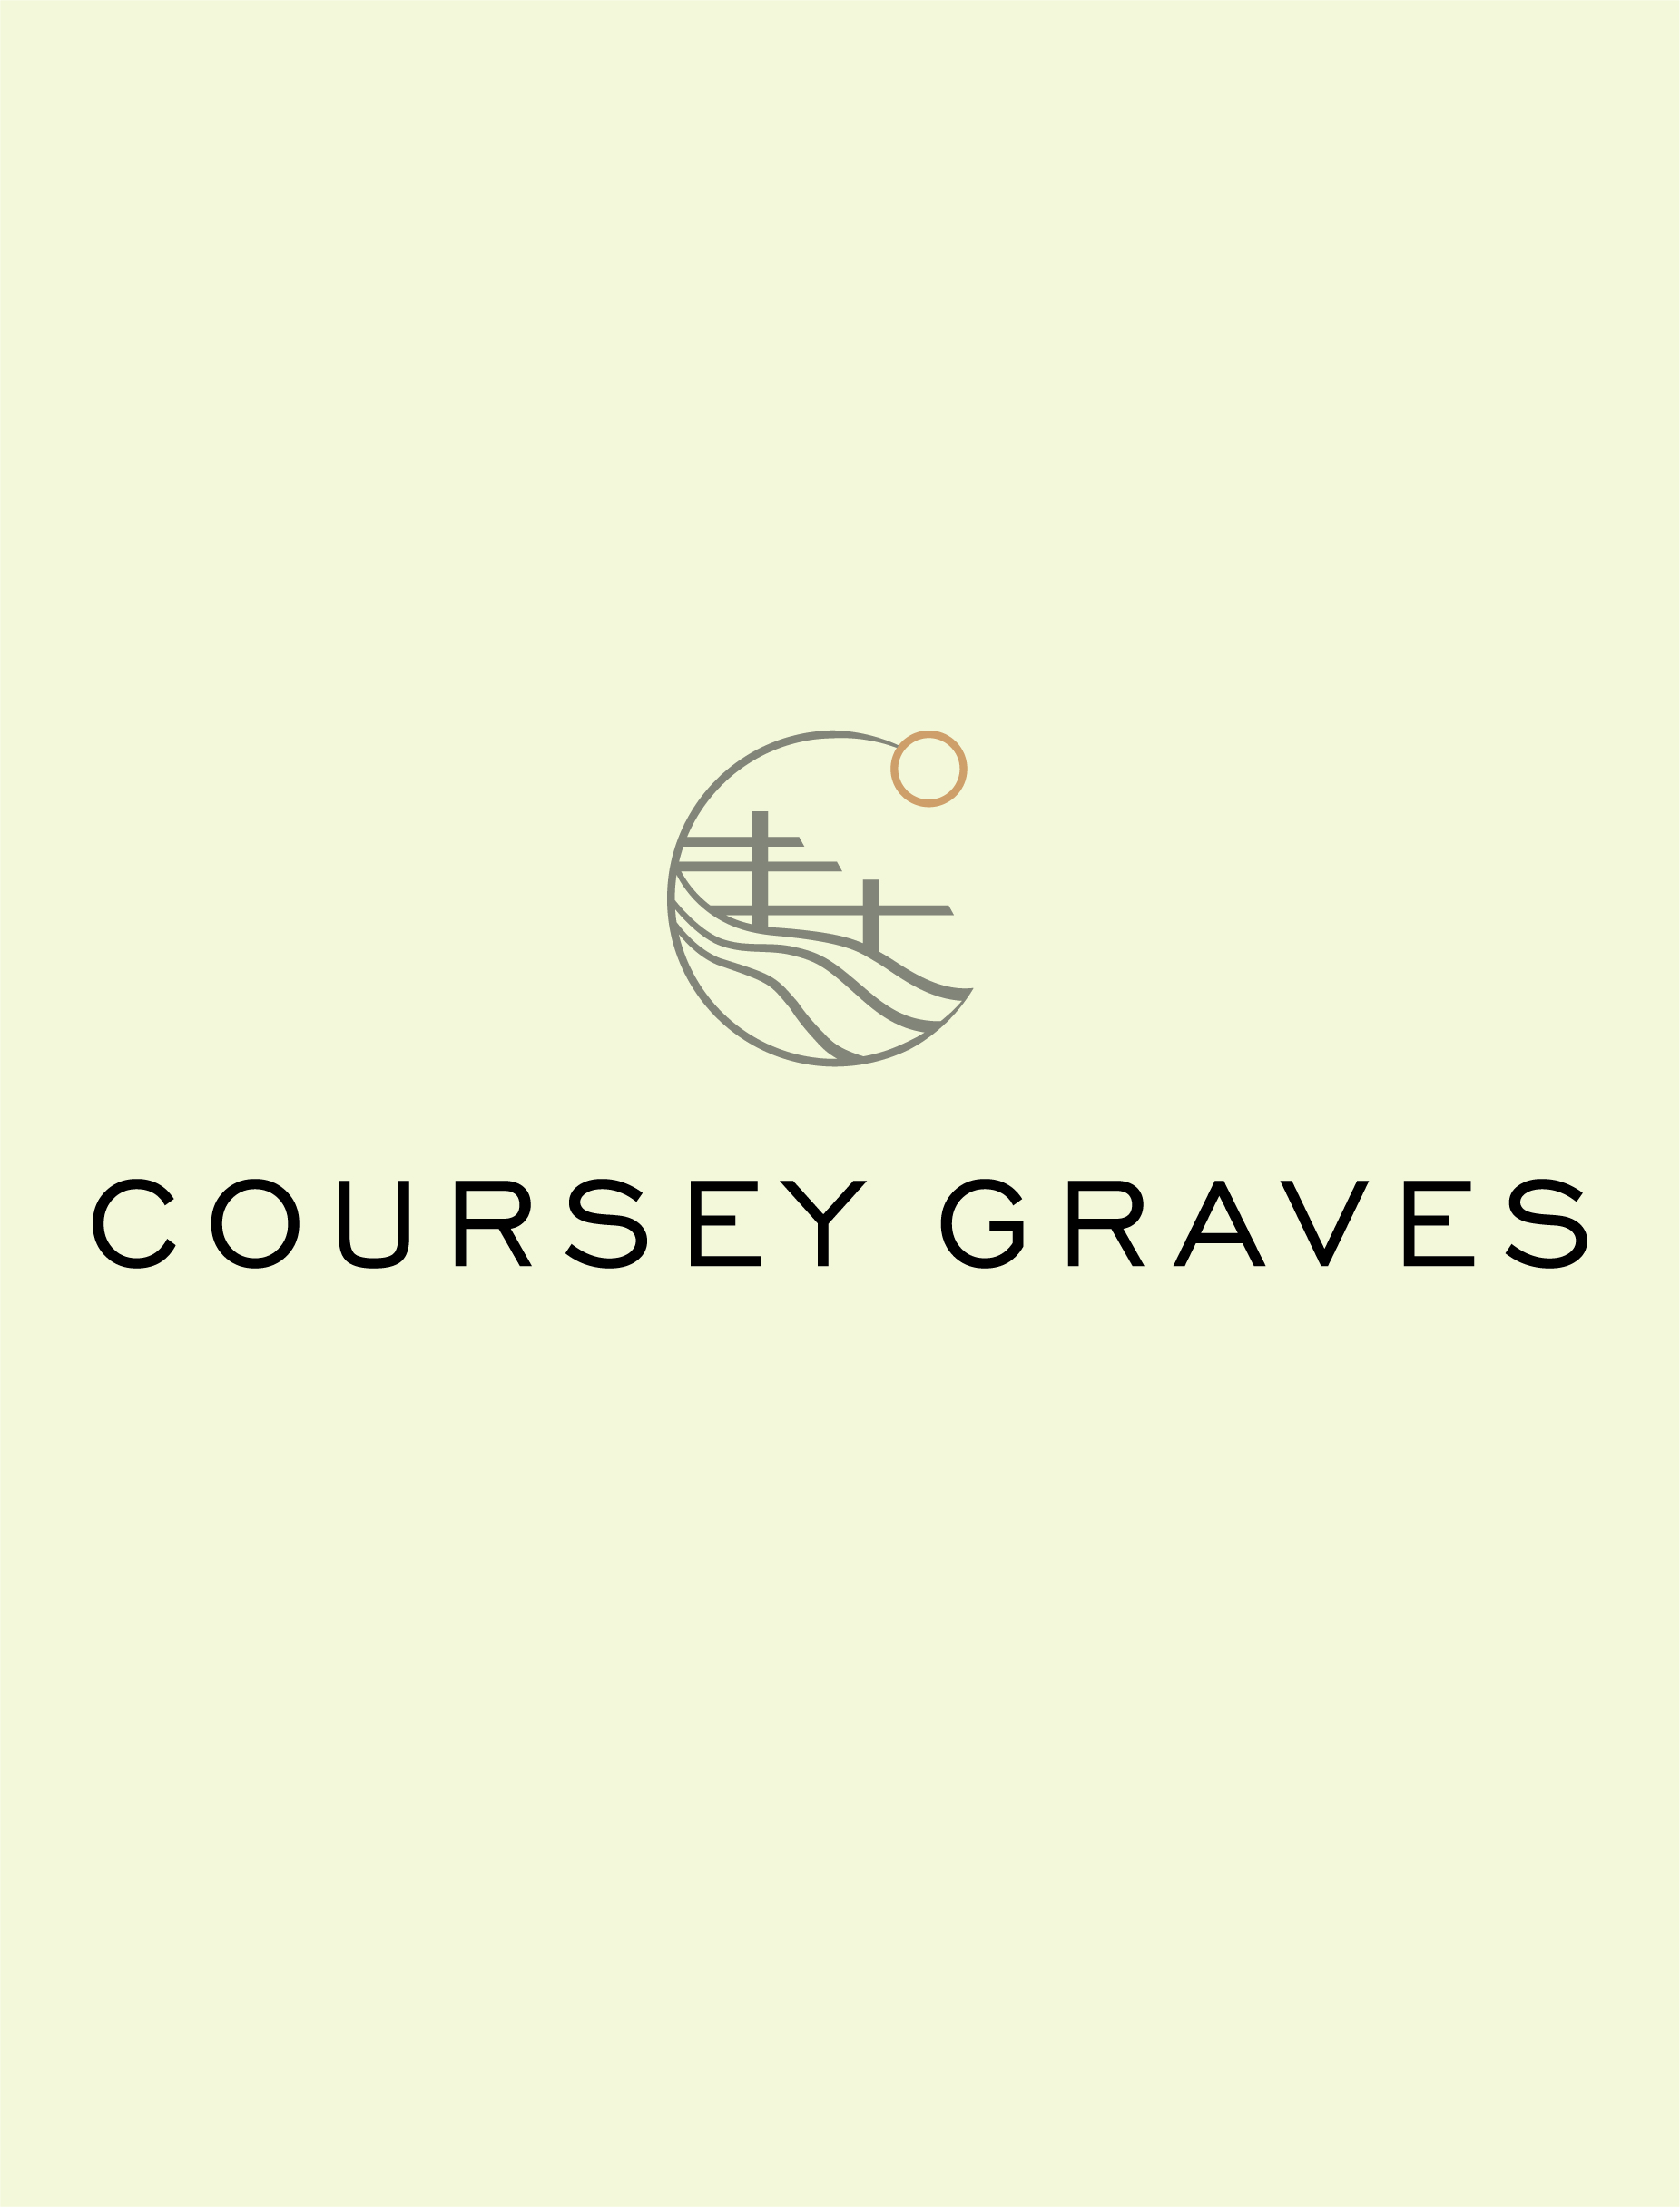 Coursey Graves (Estate Vineyard & Winery)